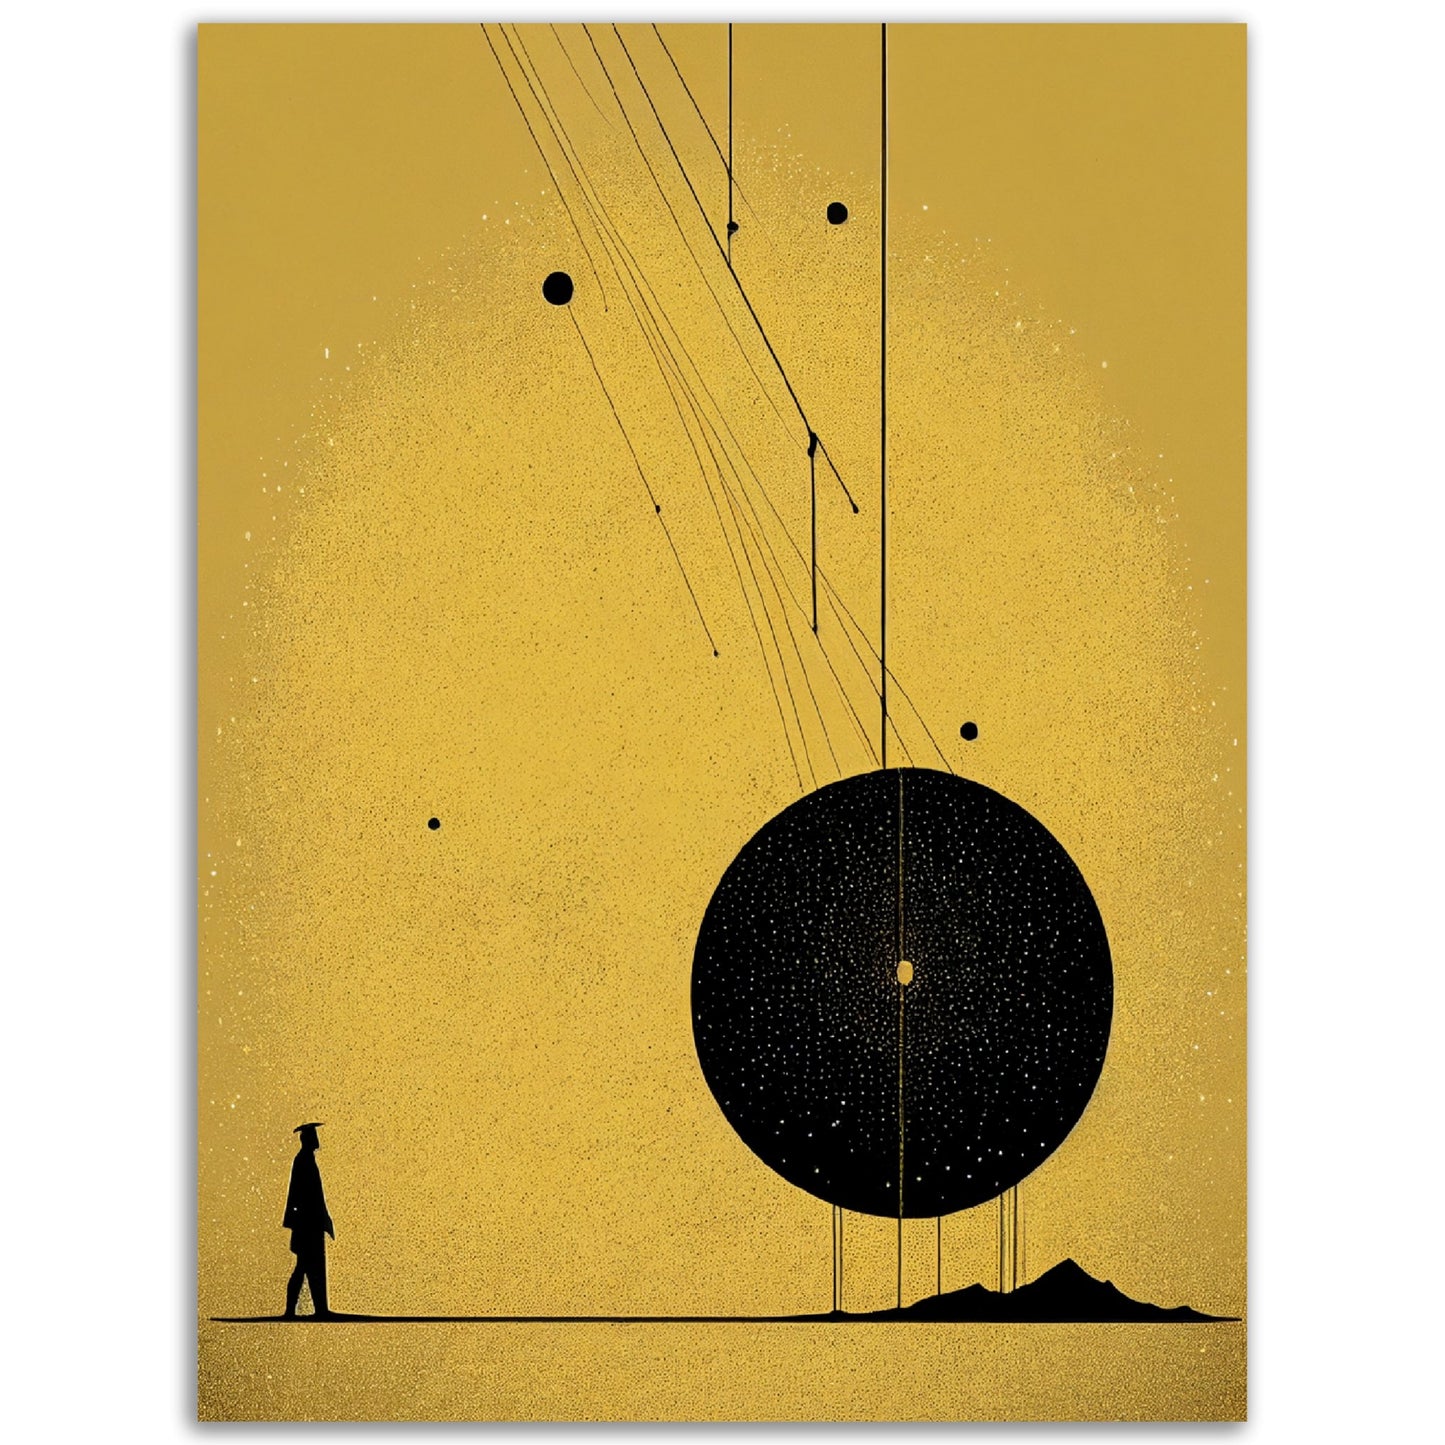 A black and yellow Abstract Universal Truth wall art depicting a man standing in front of a planet.